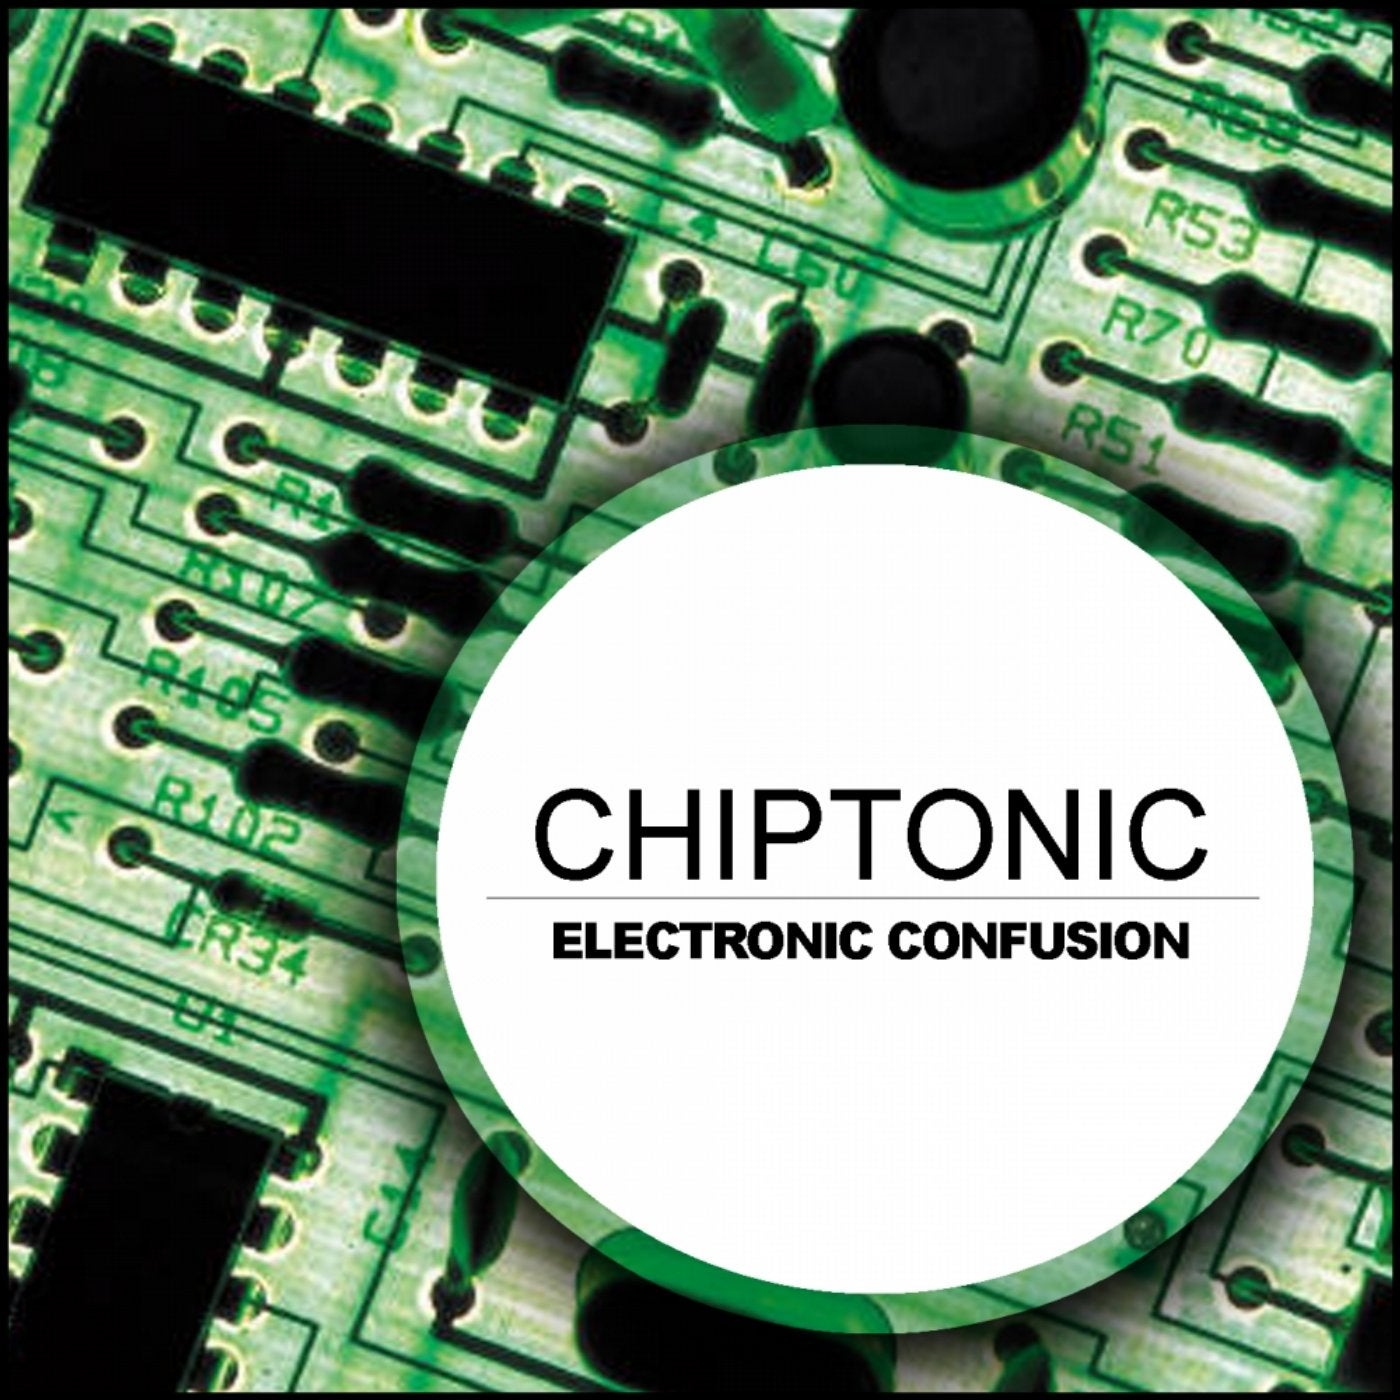 Chiptonic: Electronic Confusion